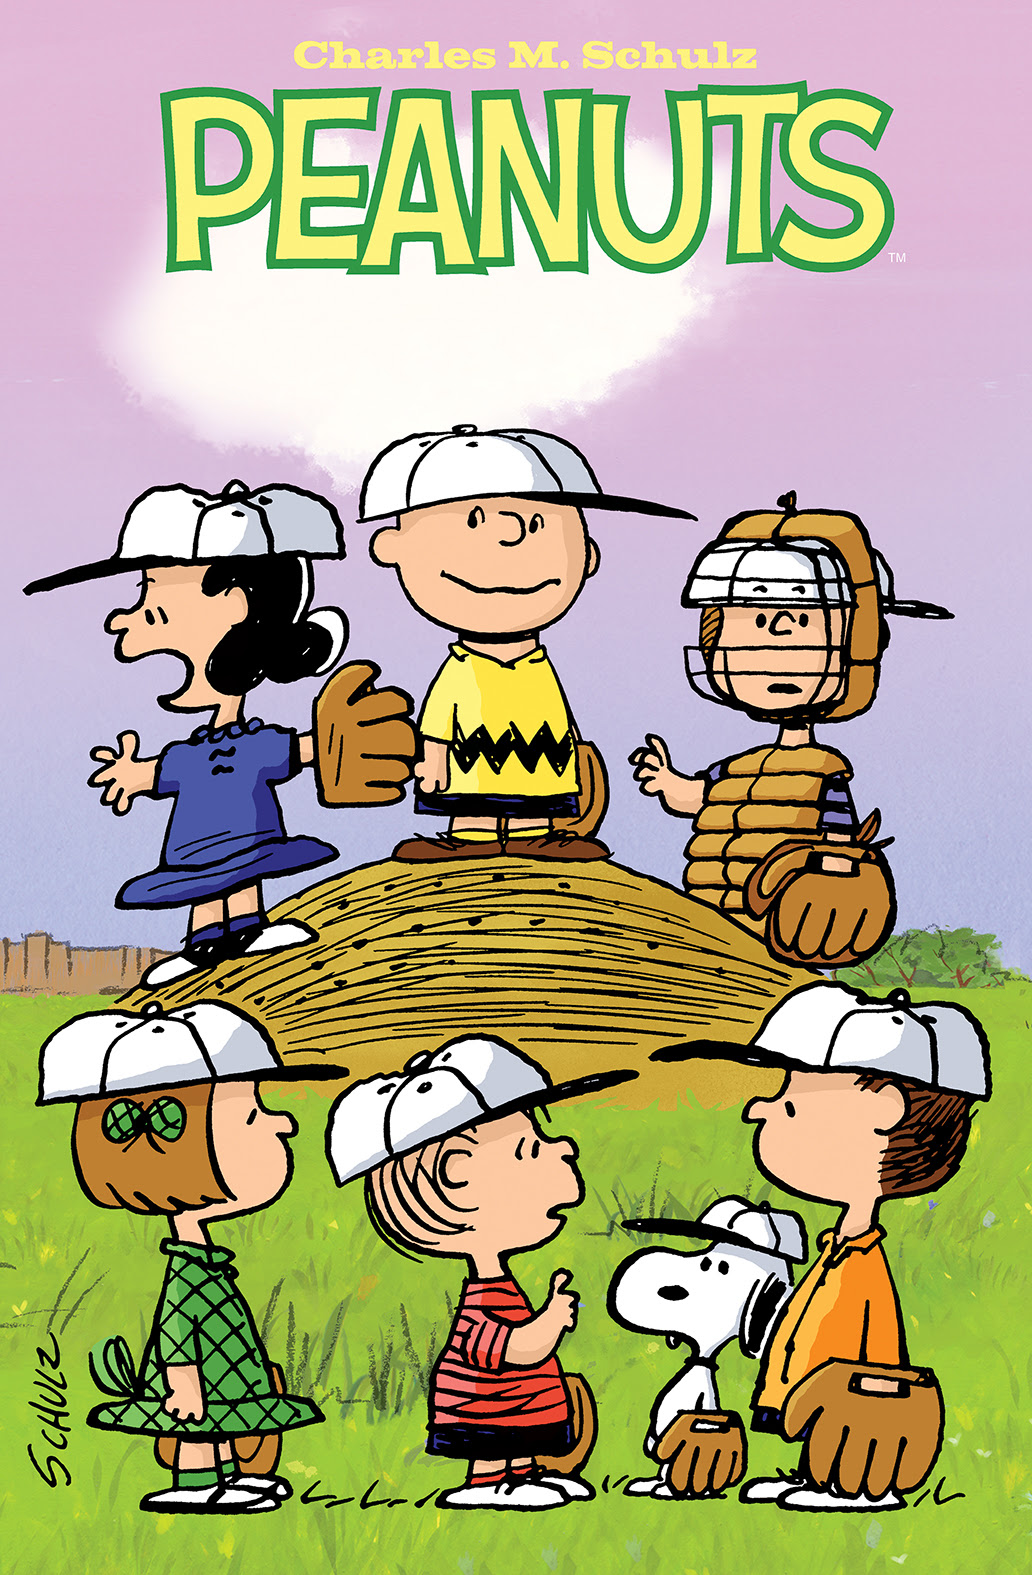 PEANUTS #18 Cover by Charles Schulz, Various